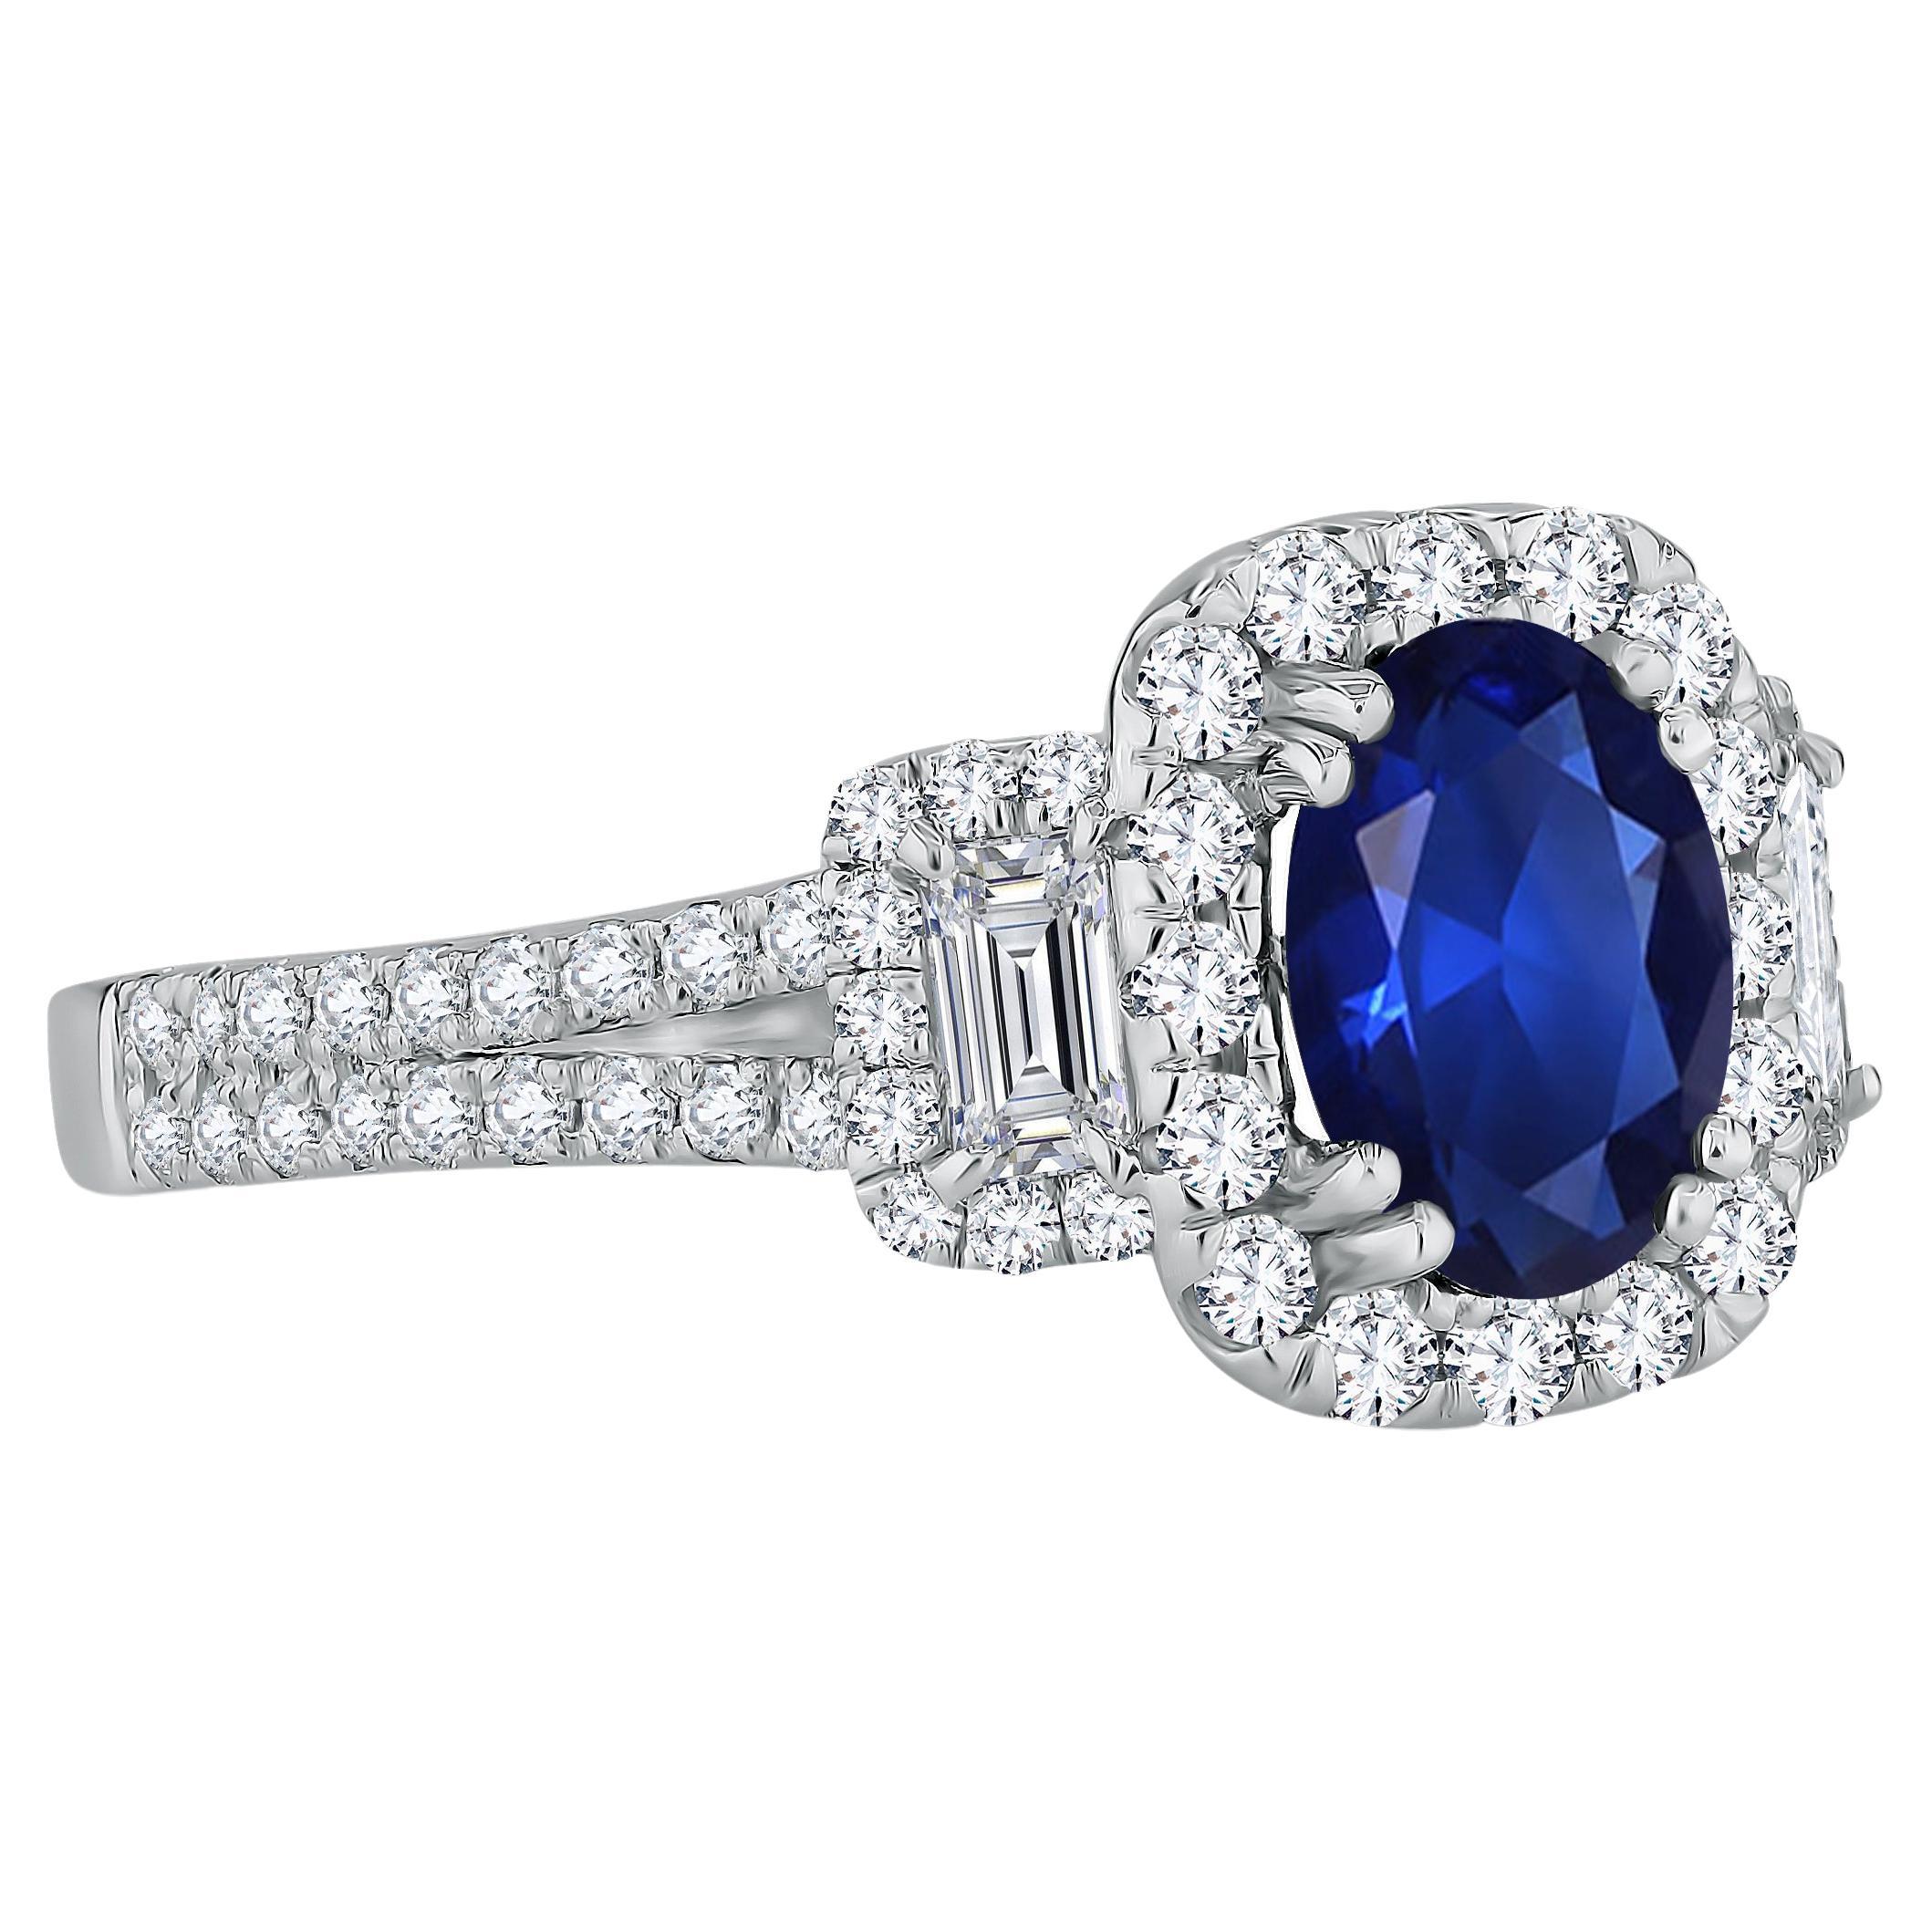 1.25 Carat Oval Cut Sapphire and 0.72 Carat Natural Diamond Ring in 18W ref1570